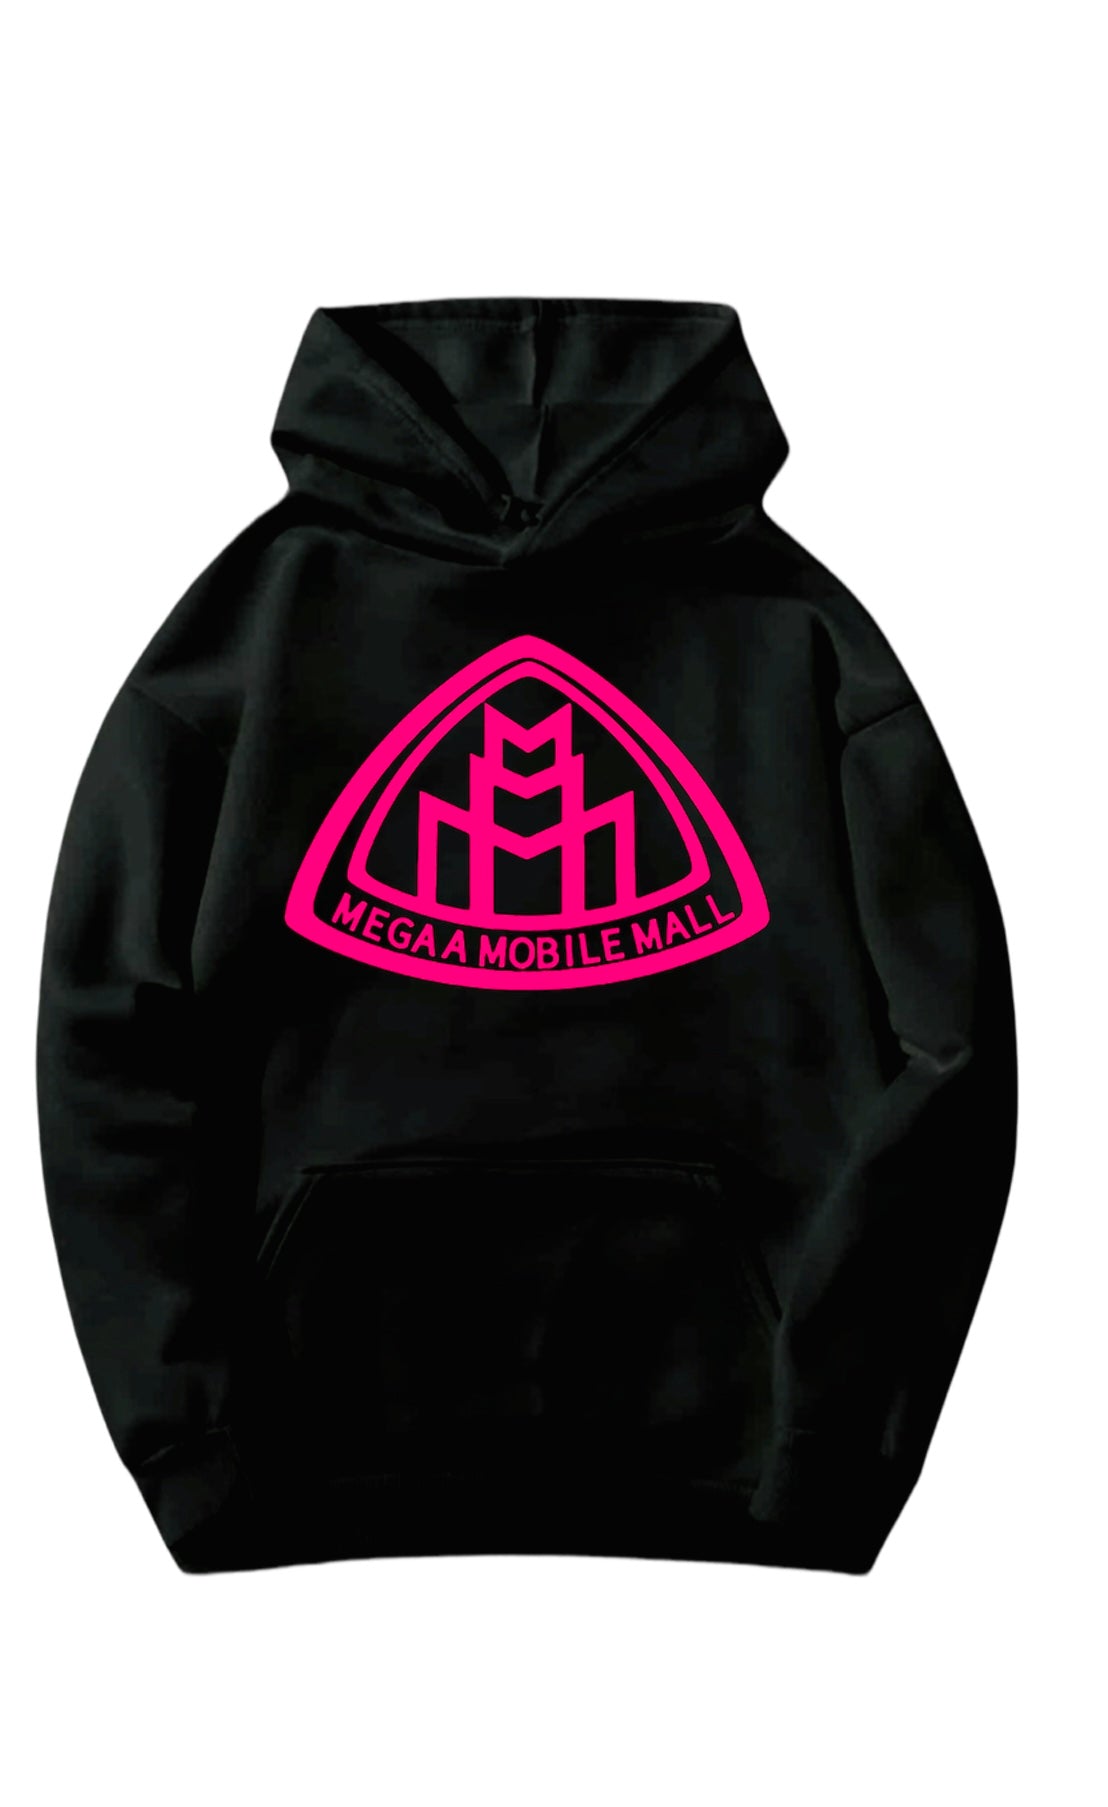 black megaamobilemall logo Heavy Blend Fleece Hoodie with pink logo